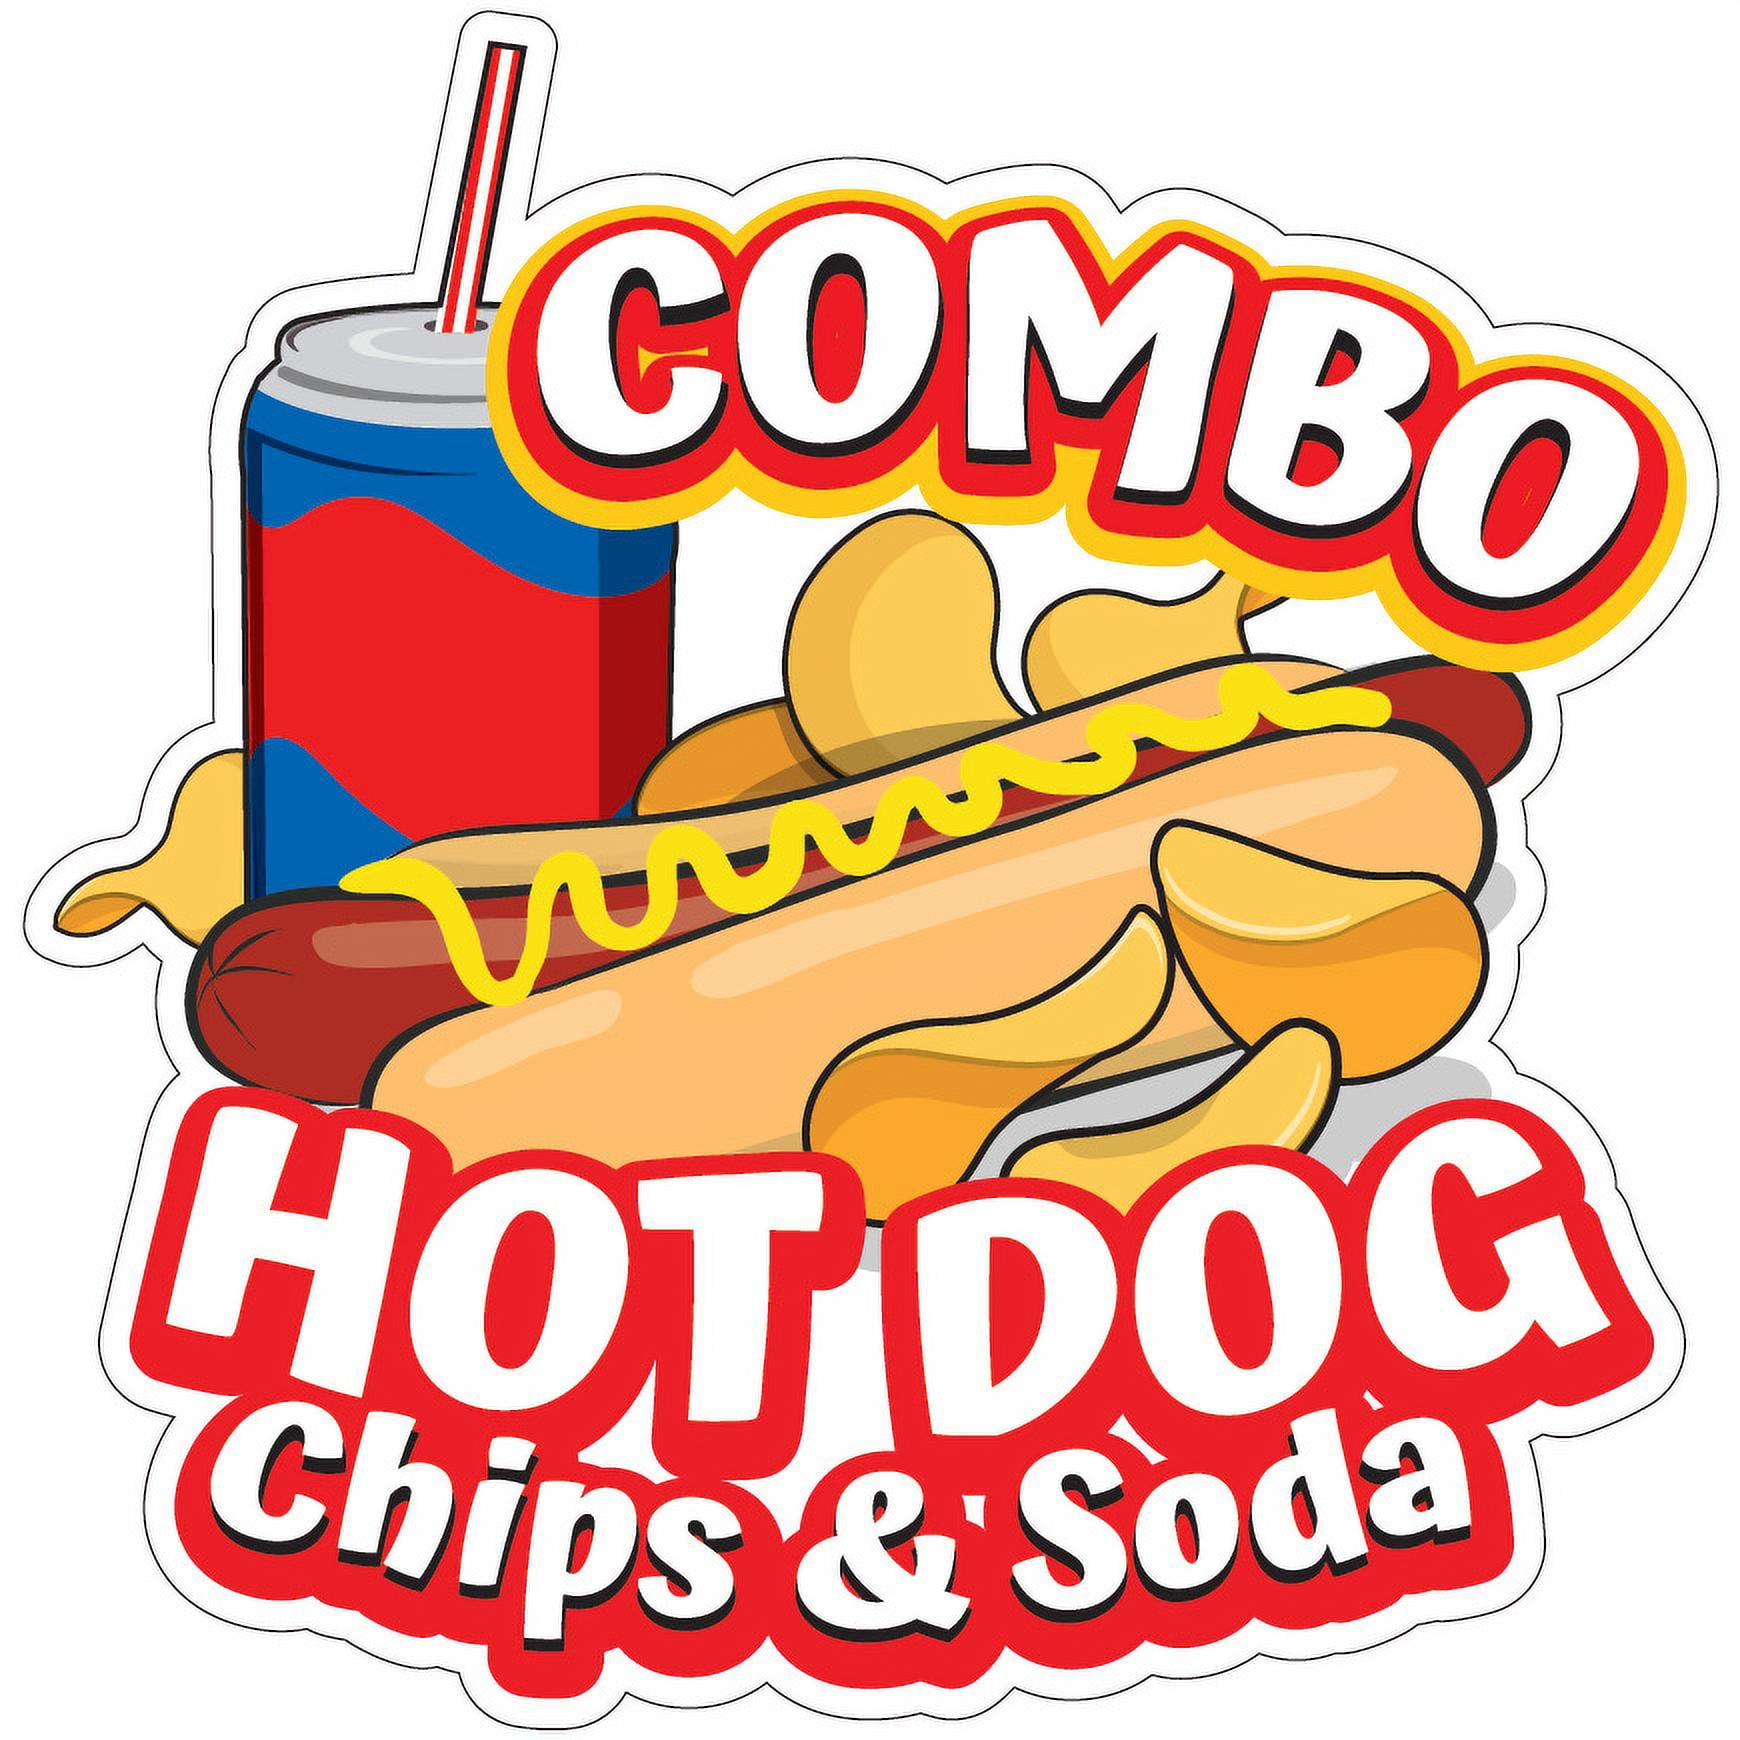 Hot Dogs Soda Combos Decal 14" Restaurant Food Truck Concession Vinyl Sticker 